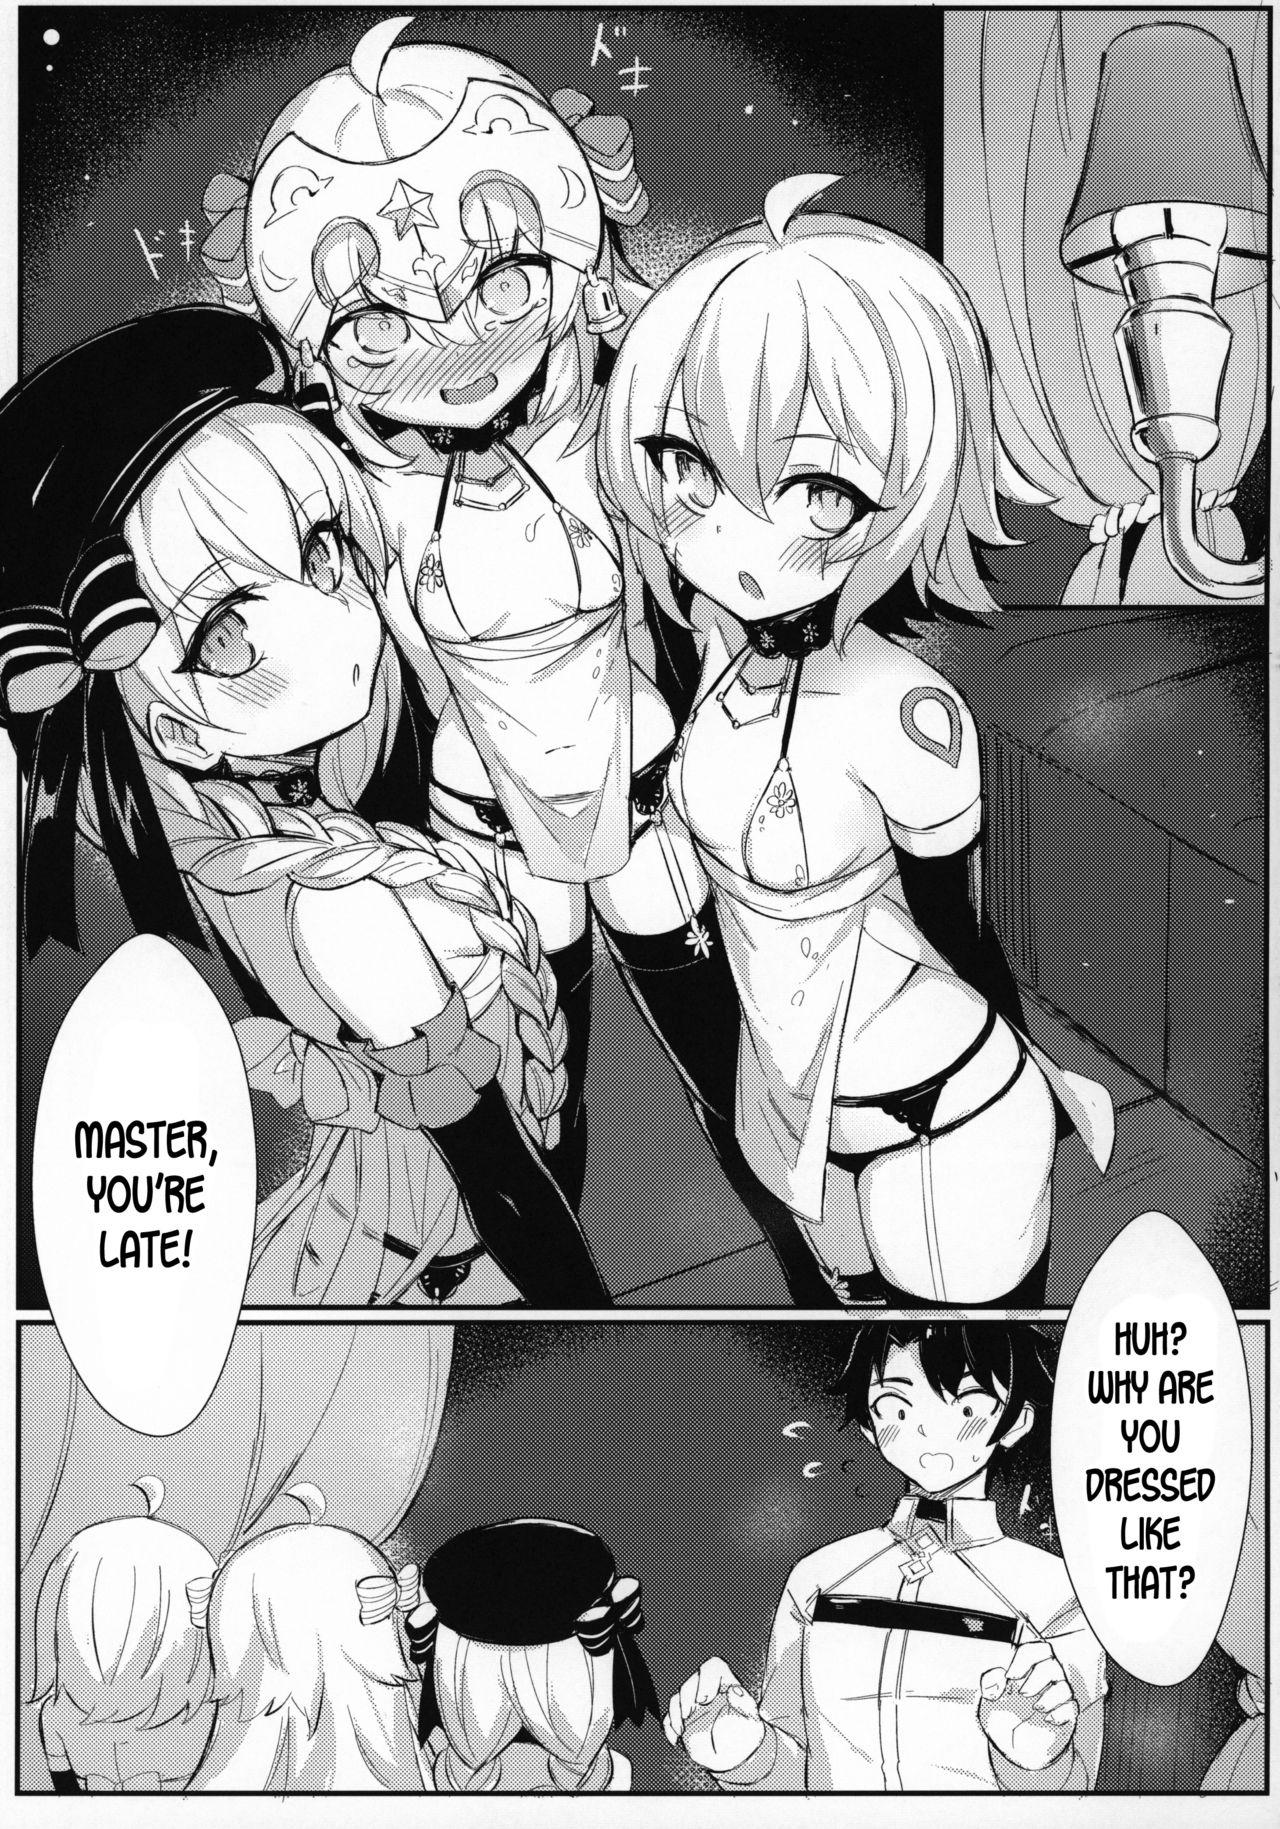 Passivo OH! MASTER - Fate grand order Ass Licking - Page 4